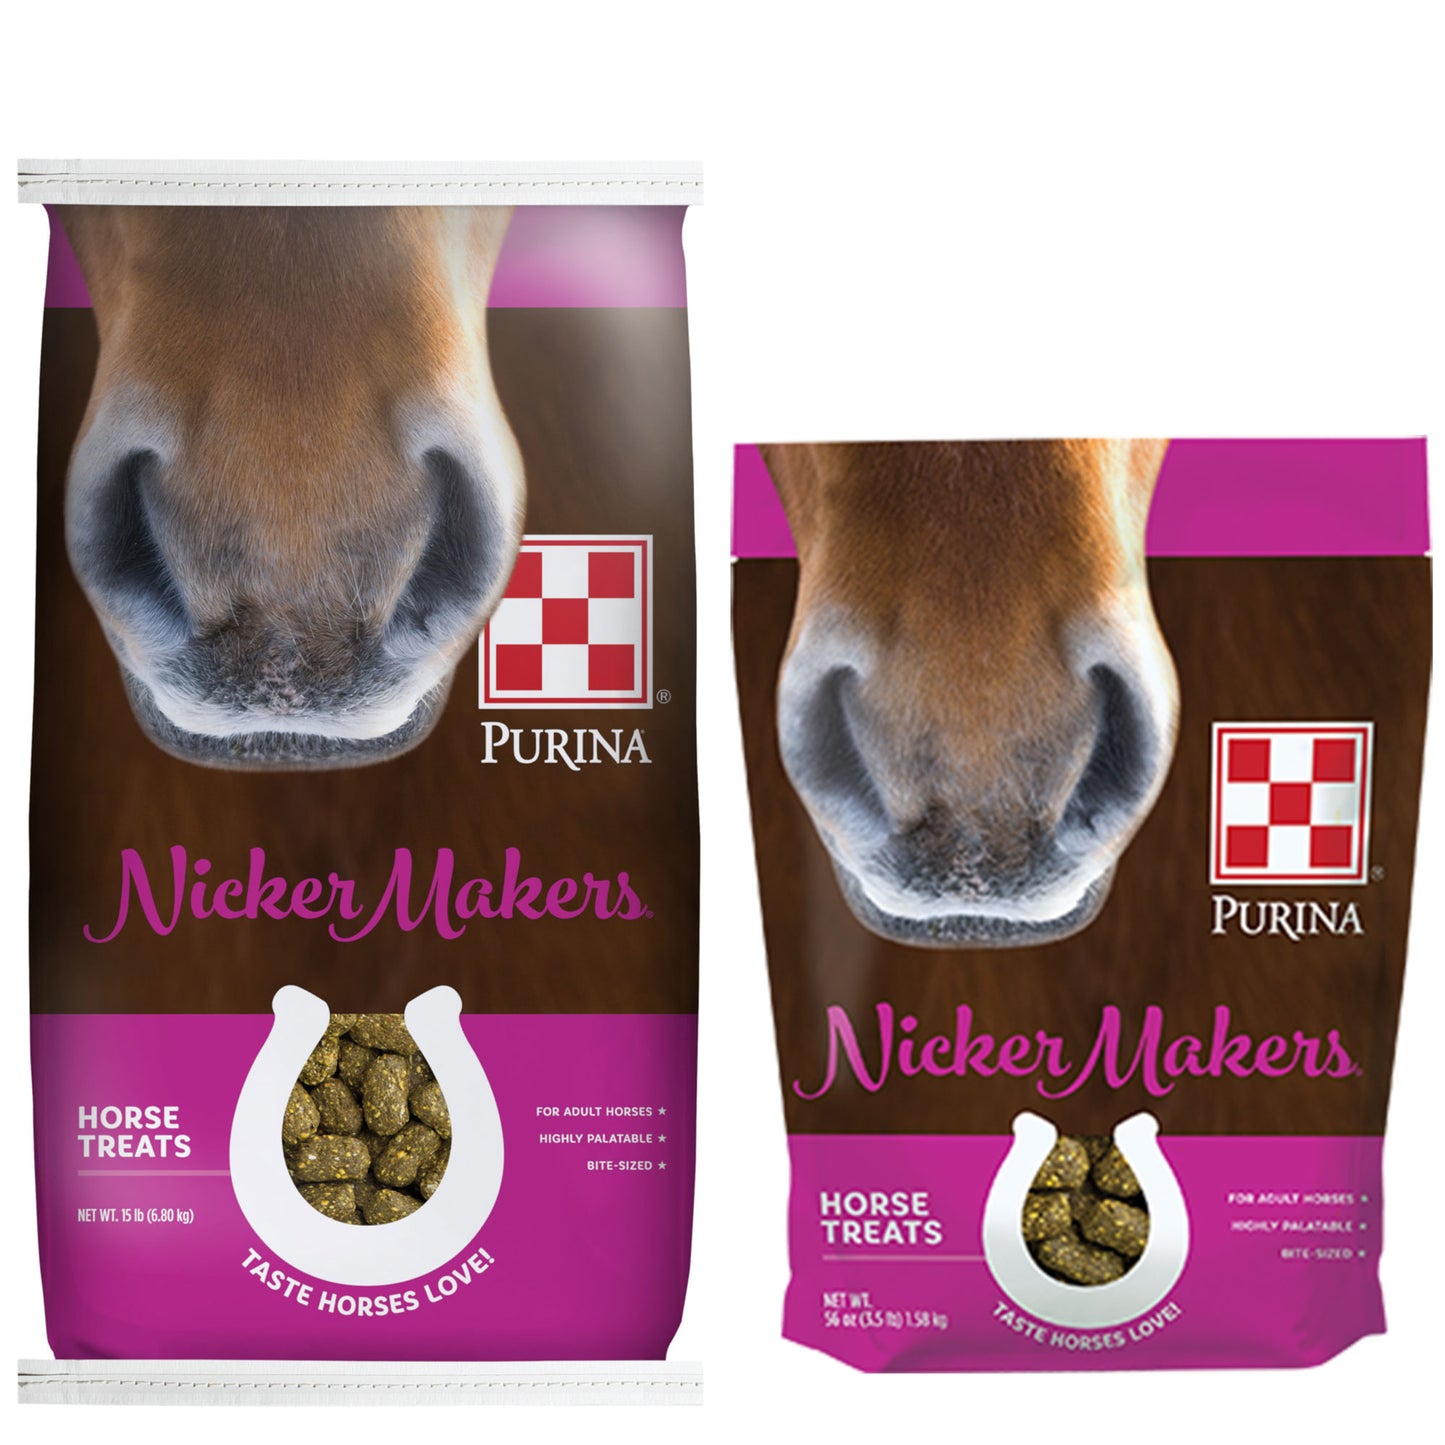 Purina Nicker Maker Horse Treats 3.5 Pound Pouch and 15 Pound Bag grouped together